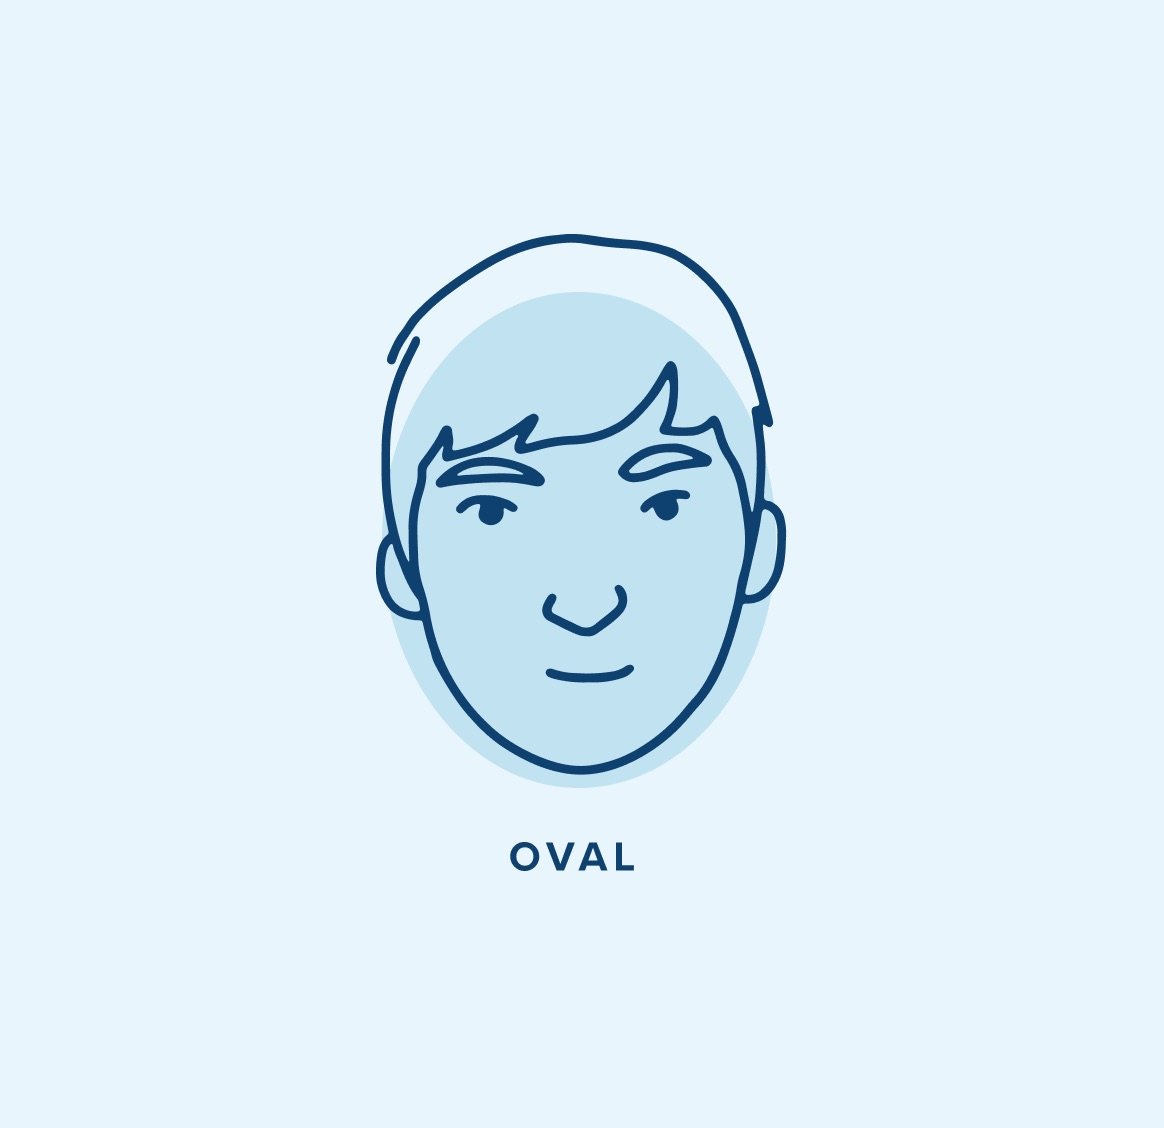 Illustration of an oval face shape